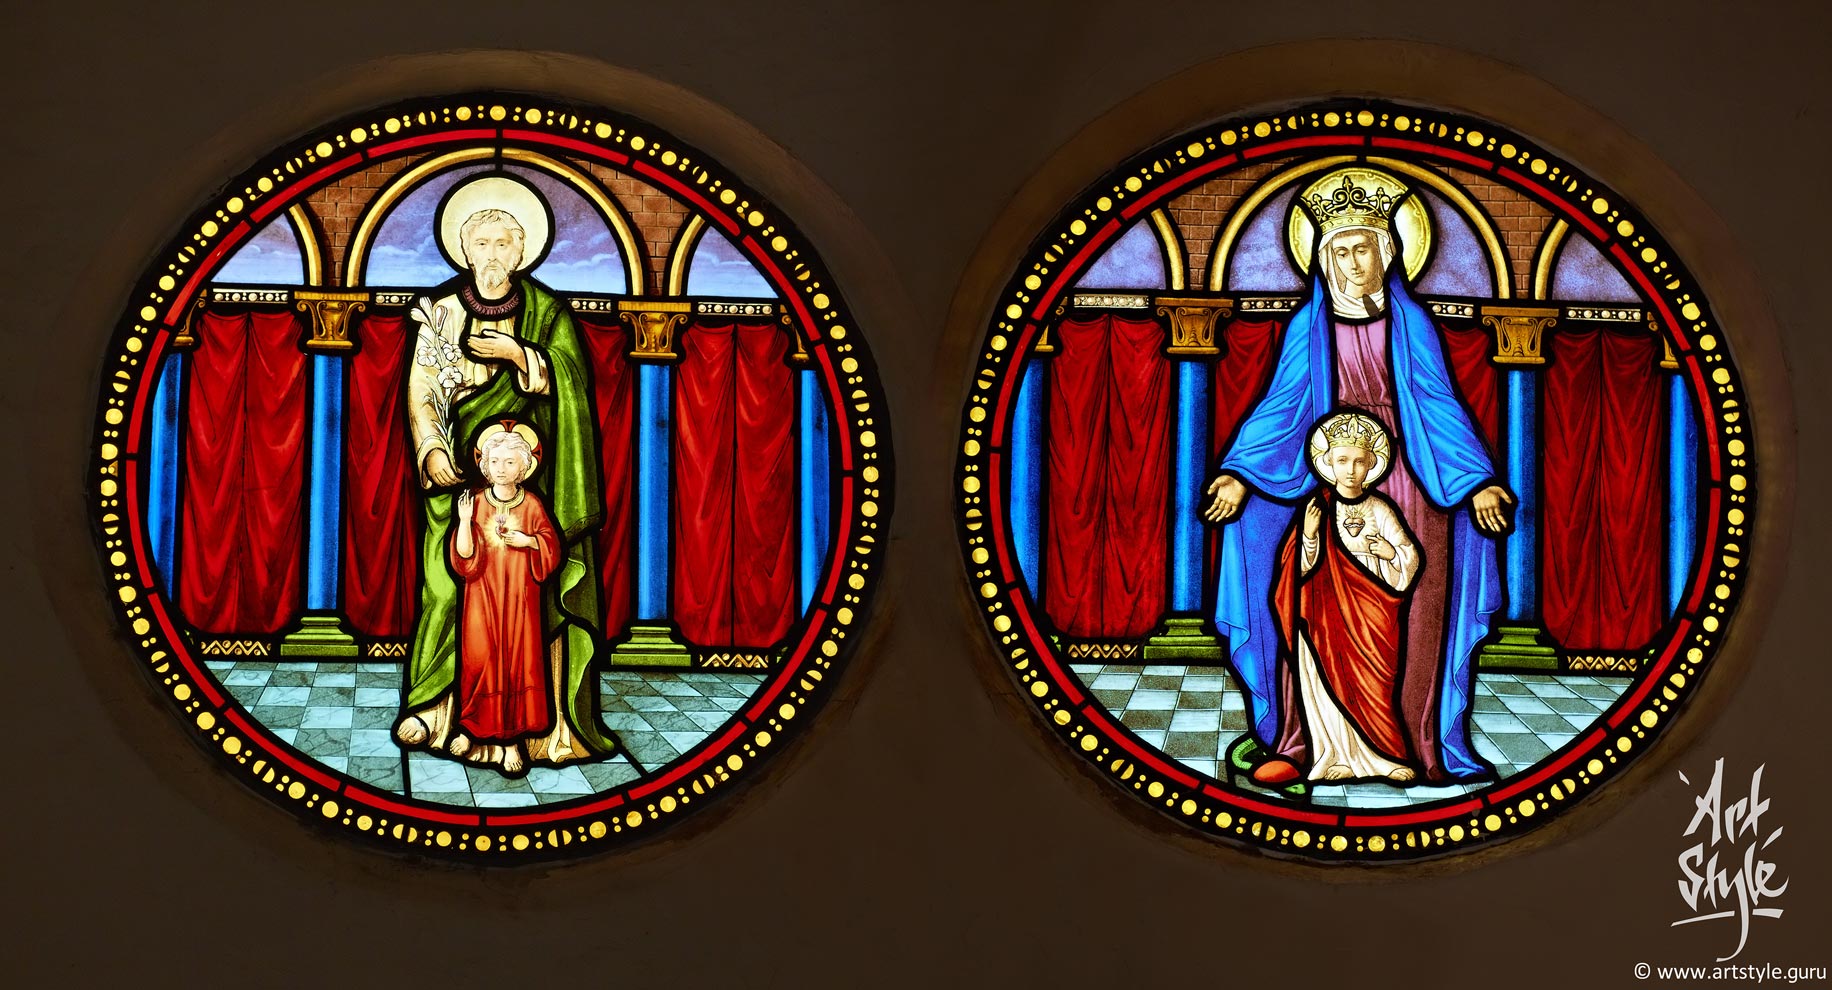 Stained glass at catholic Cathedral of the Sacred Heart, Vientiane, Laos.